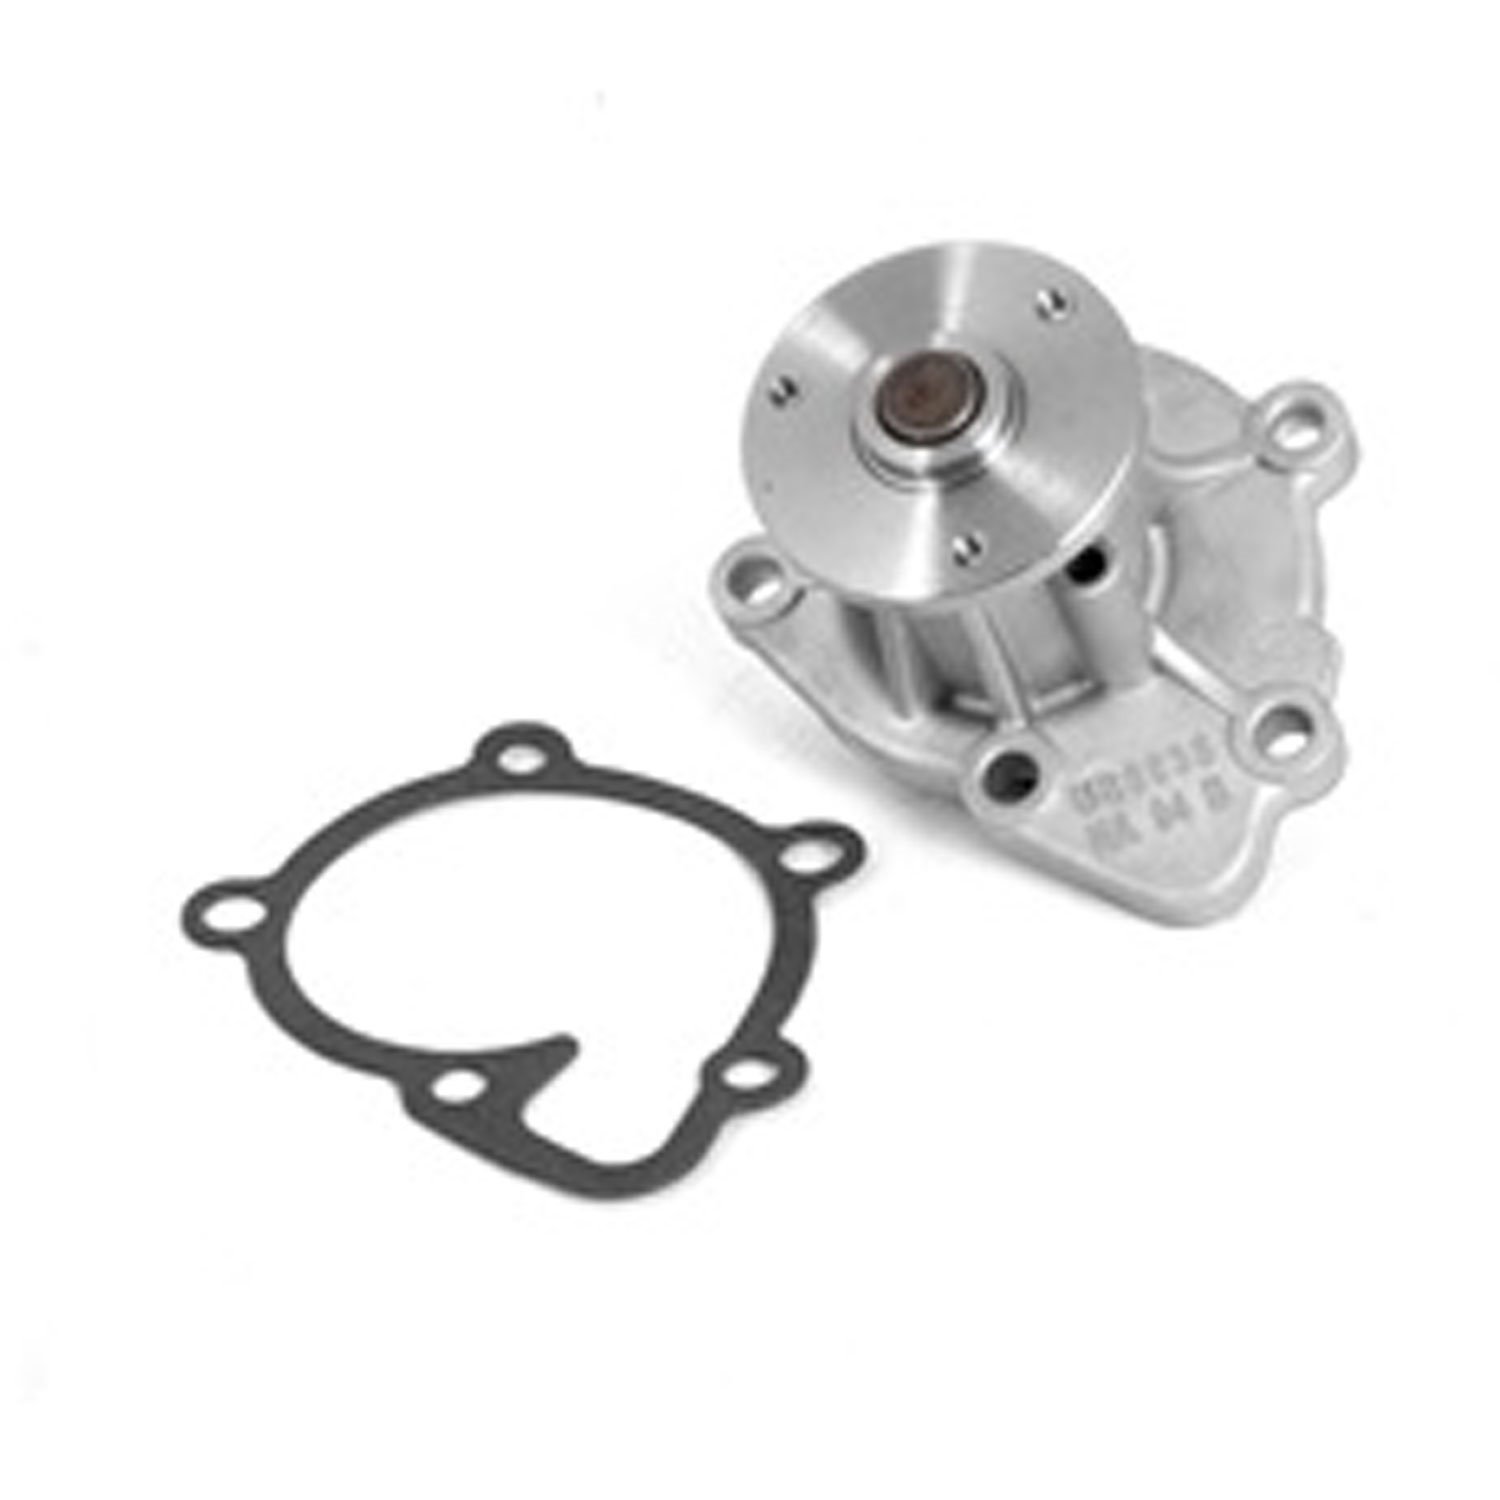 This water pump from Omix-ADA fits the 2.0L and 2.4L engines found in 07-11 Jeep Compass and Patriots.